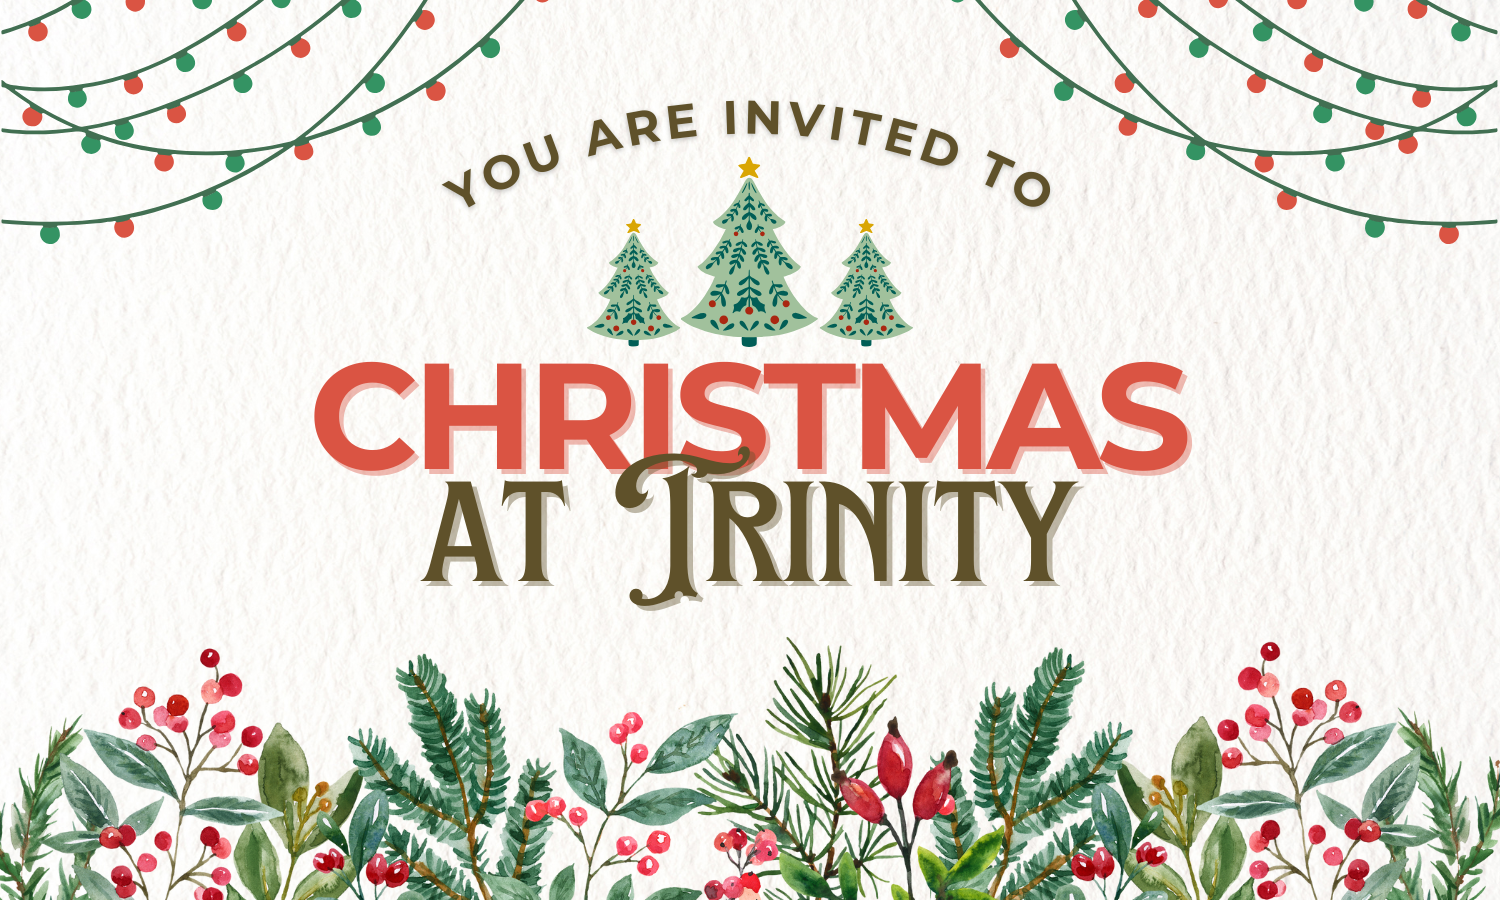 Christmas at Trinity (5 x 3 in) Front.png